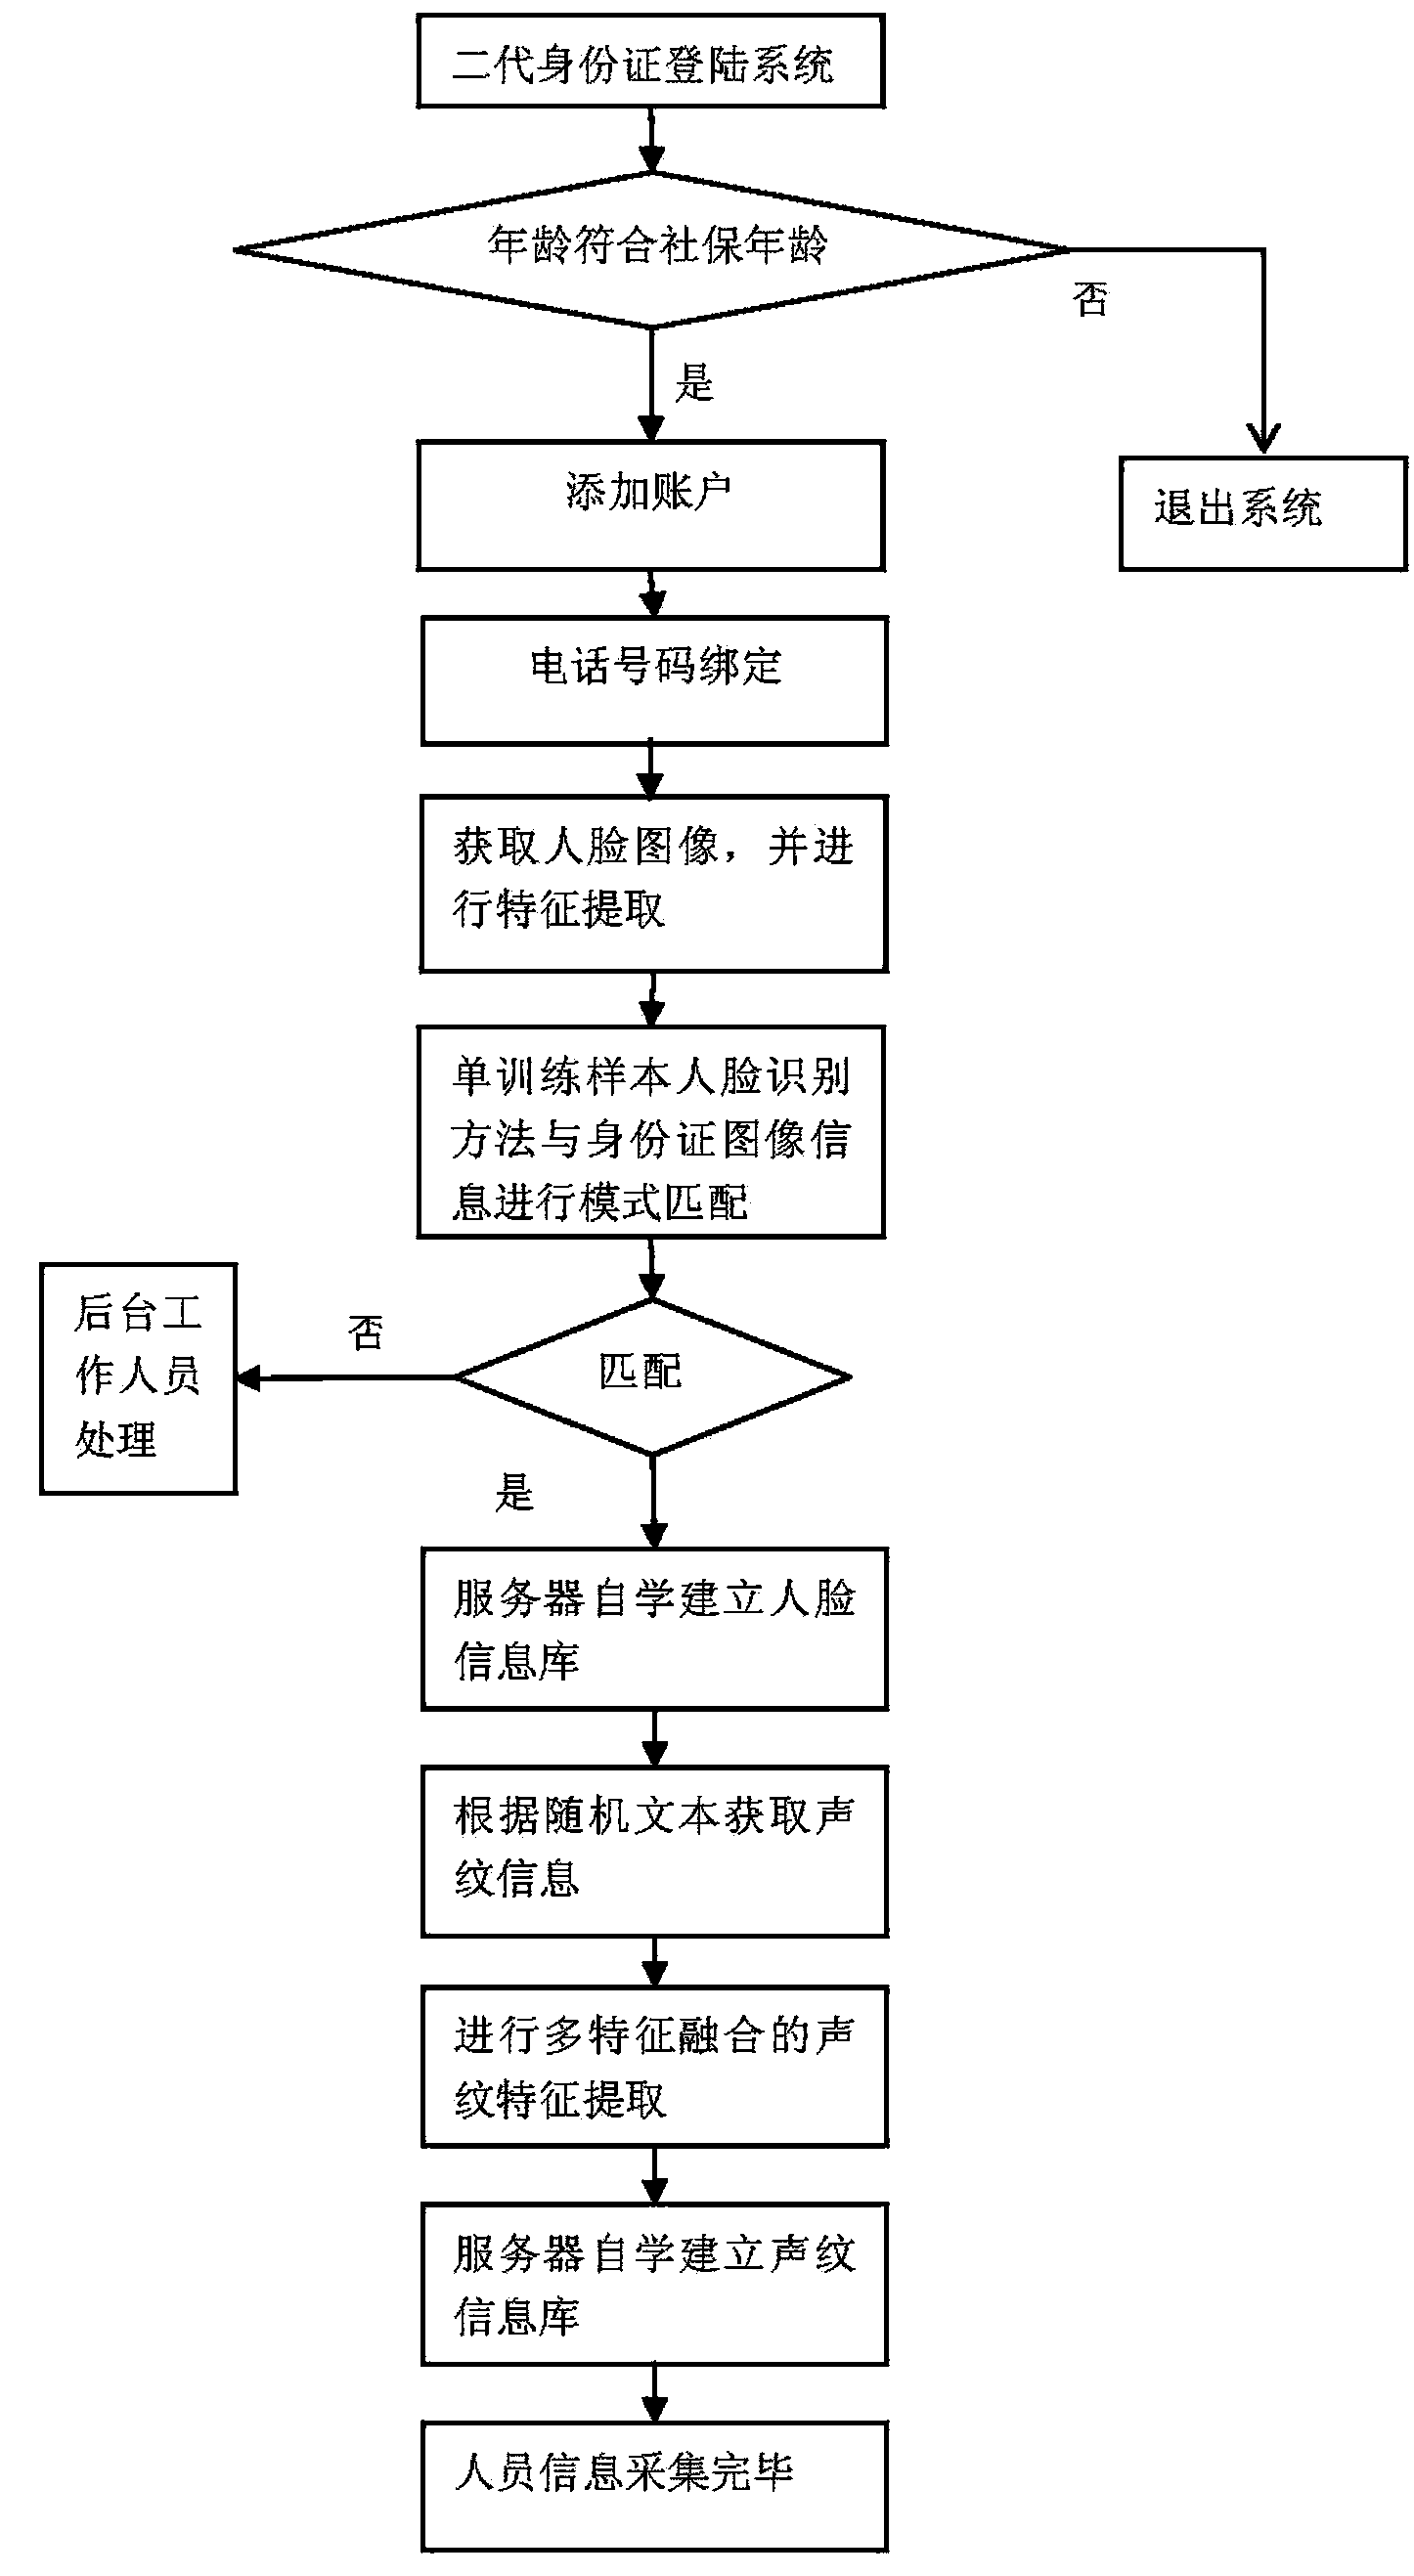 Survival authentication method on basis of identification cards and composite biological feature recognition